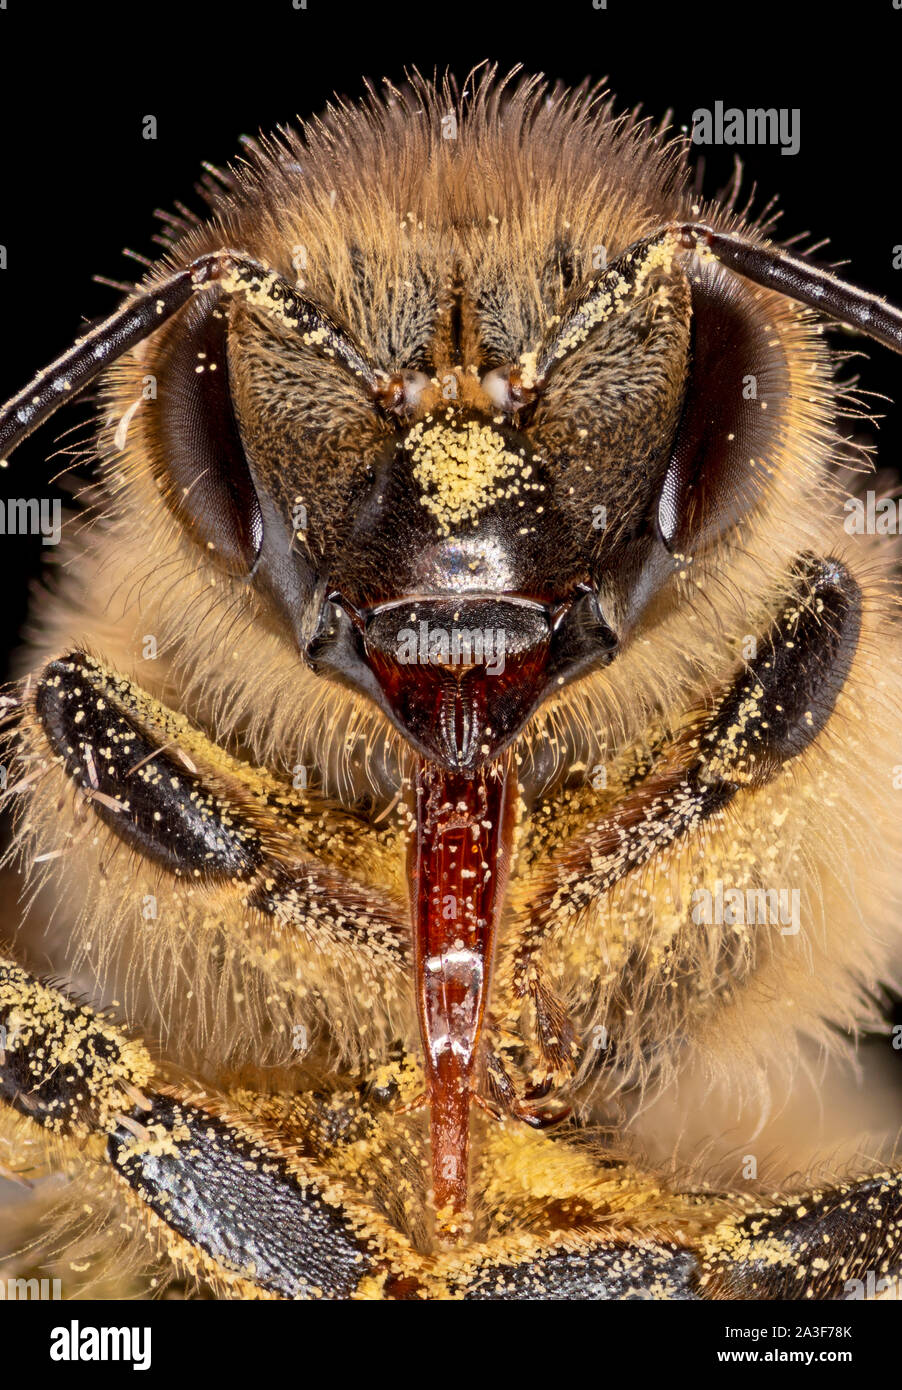 Honey bee covered in pollen, tongue exposed,  Apis mellifera Stock Photo